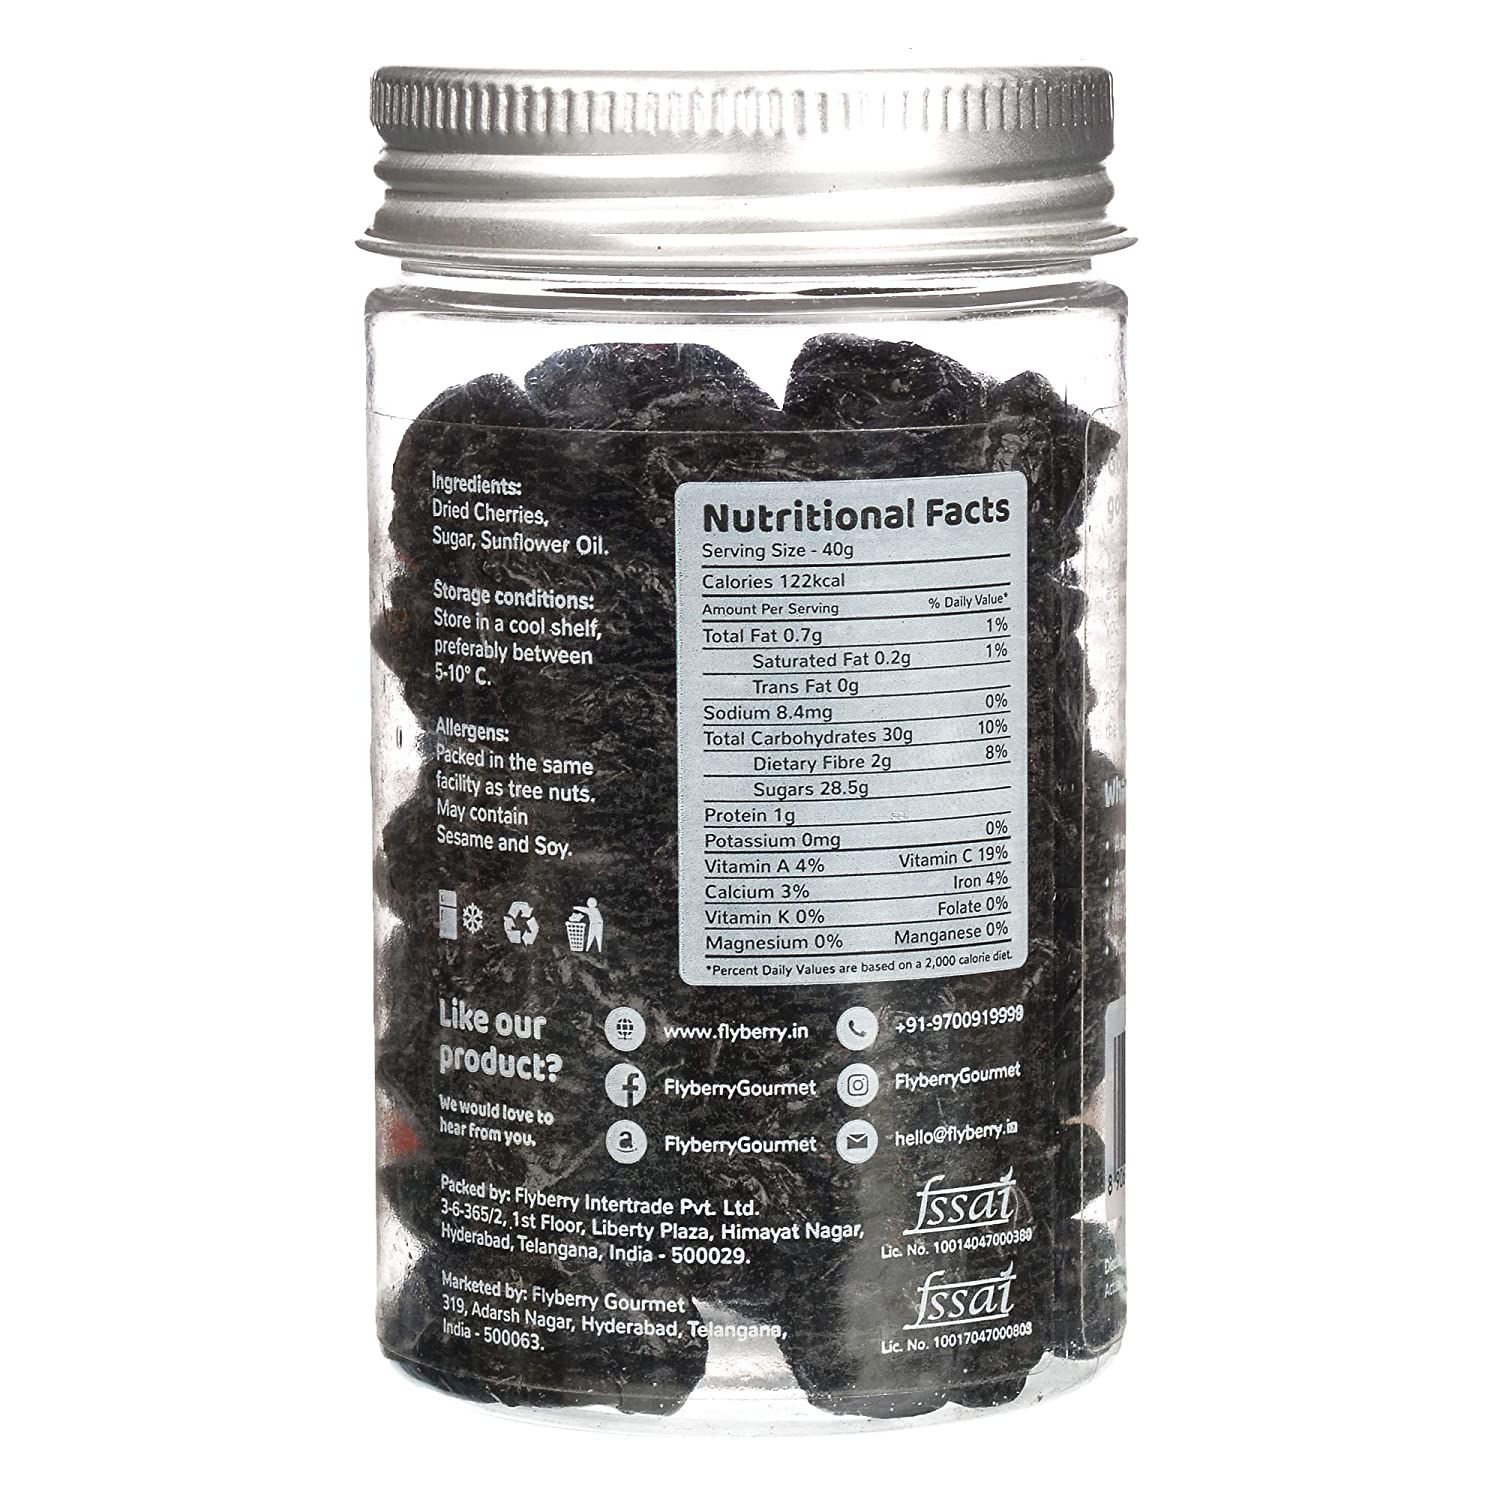 Flyberry Gourmet Premium Dried Cherry Image